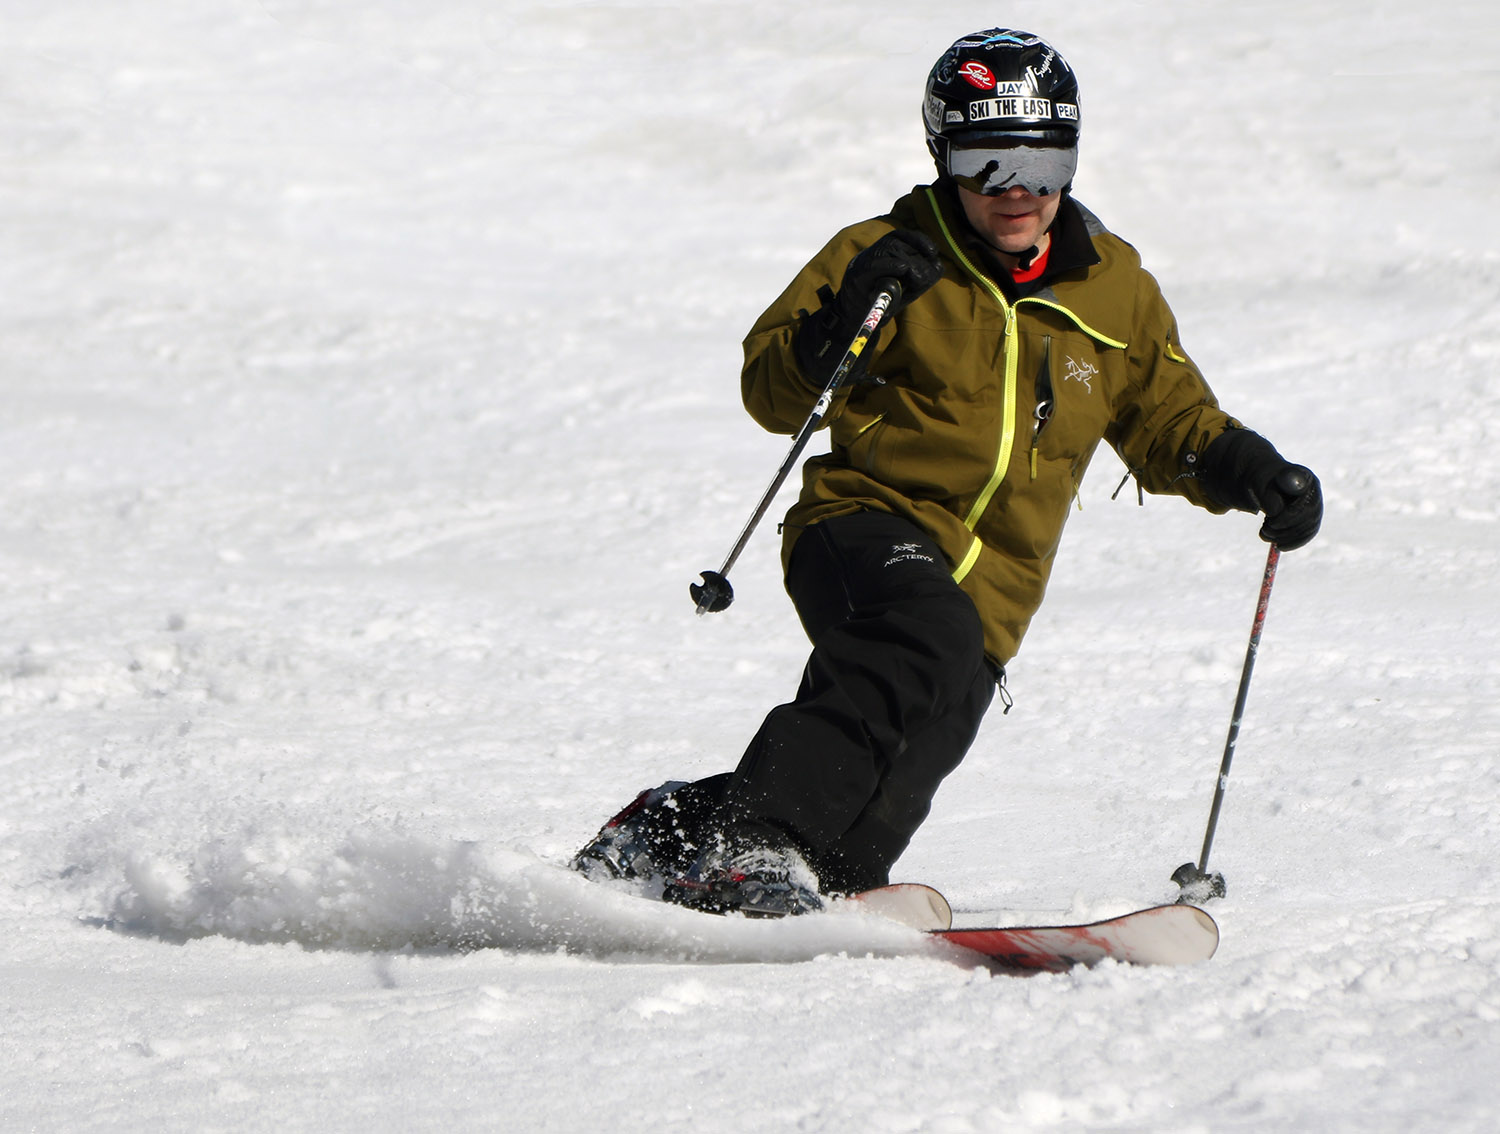 An image of Jay Telemark skiing in spring snow on the Showtime trail at Bolton Valley Ski Resort in Vermont